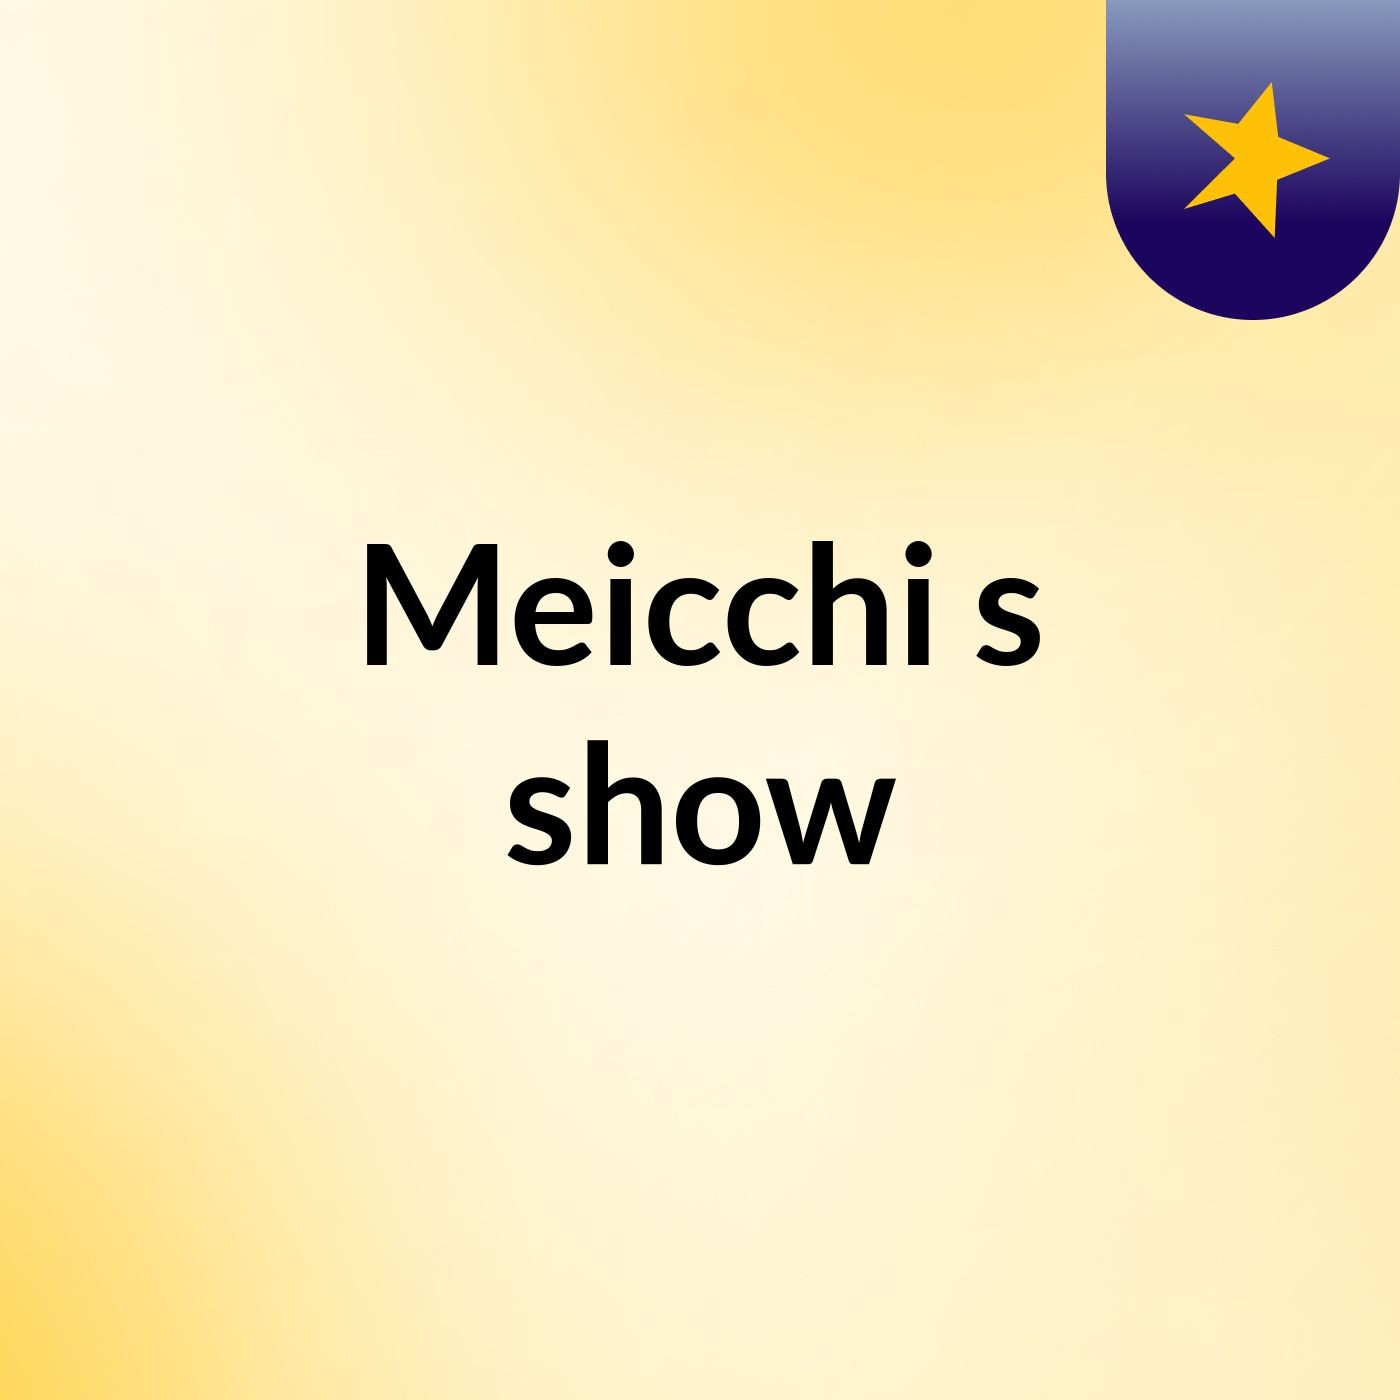 Meicchi's show